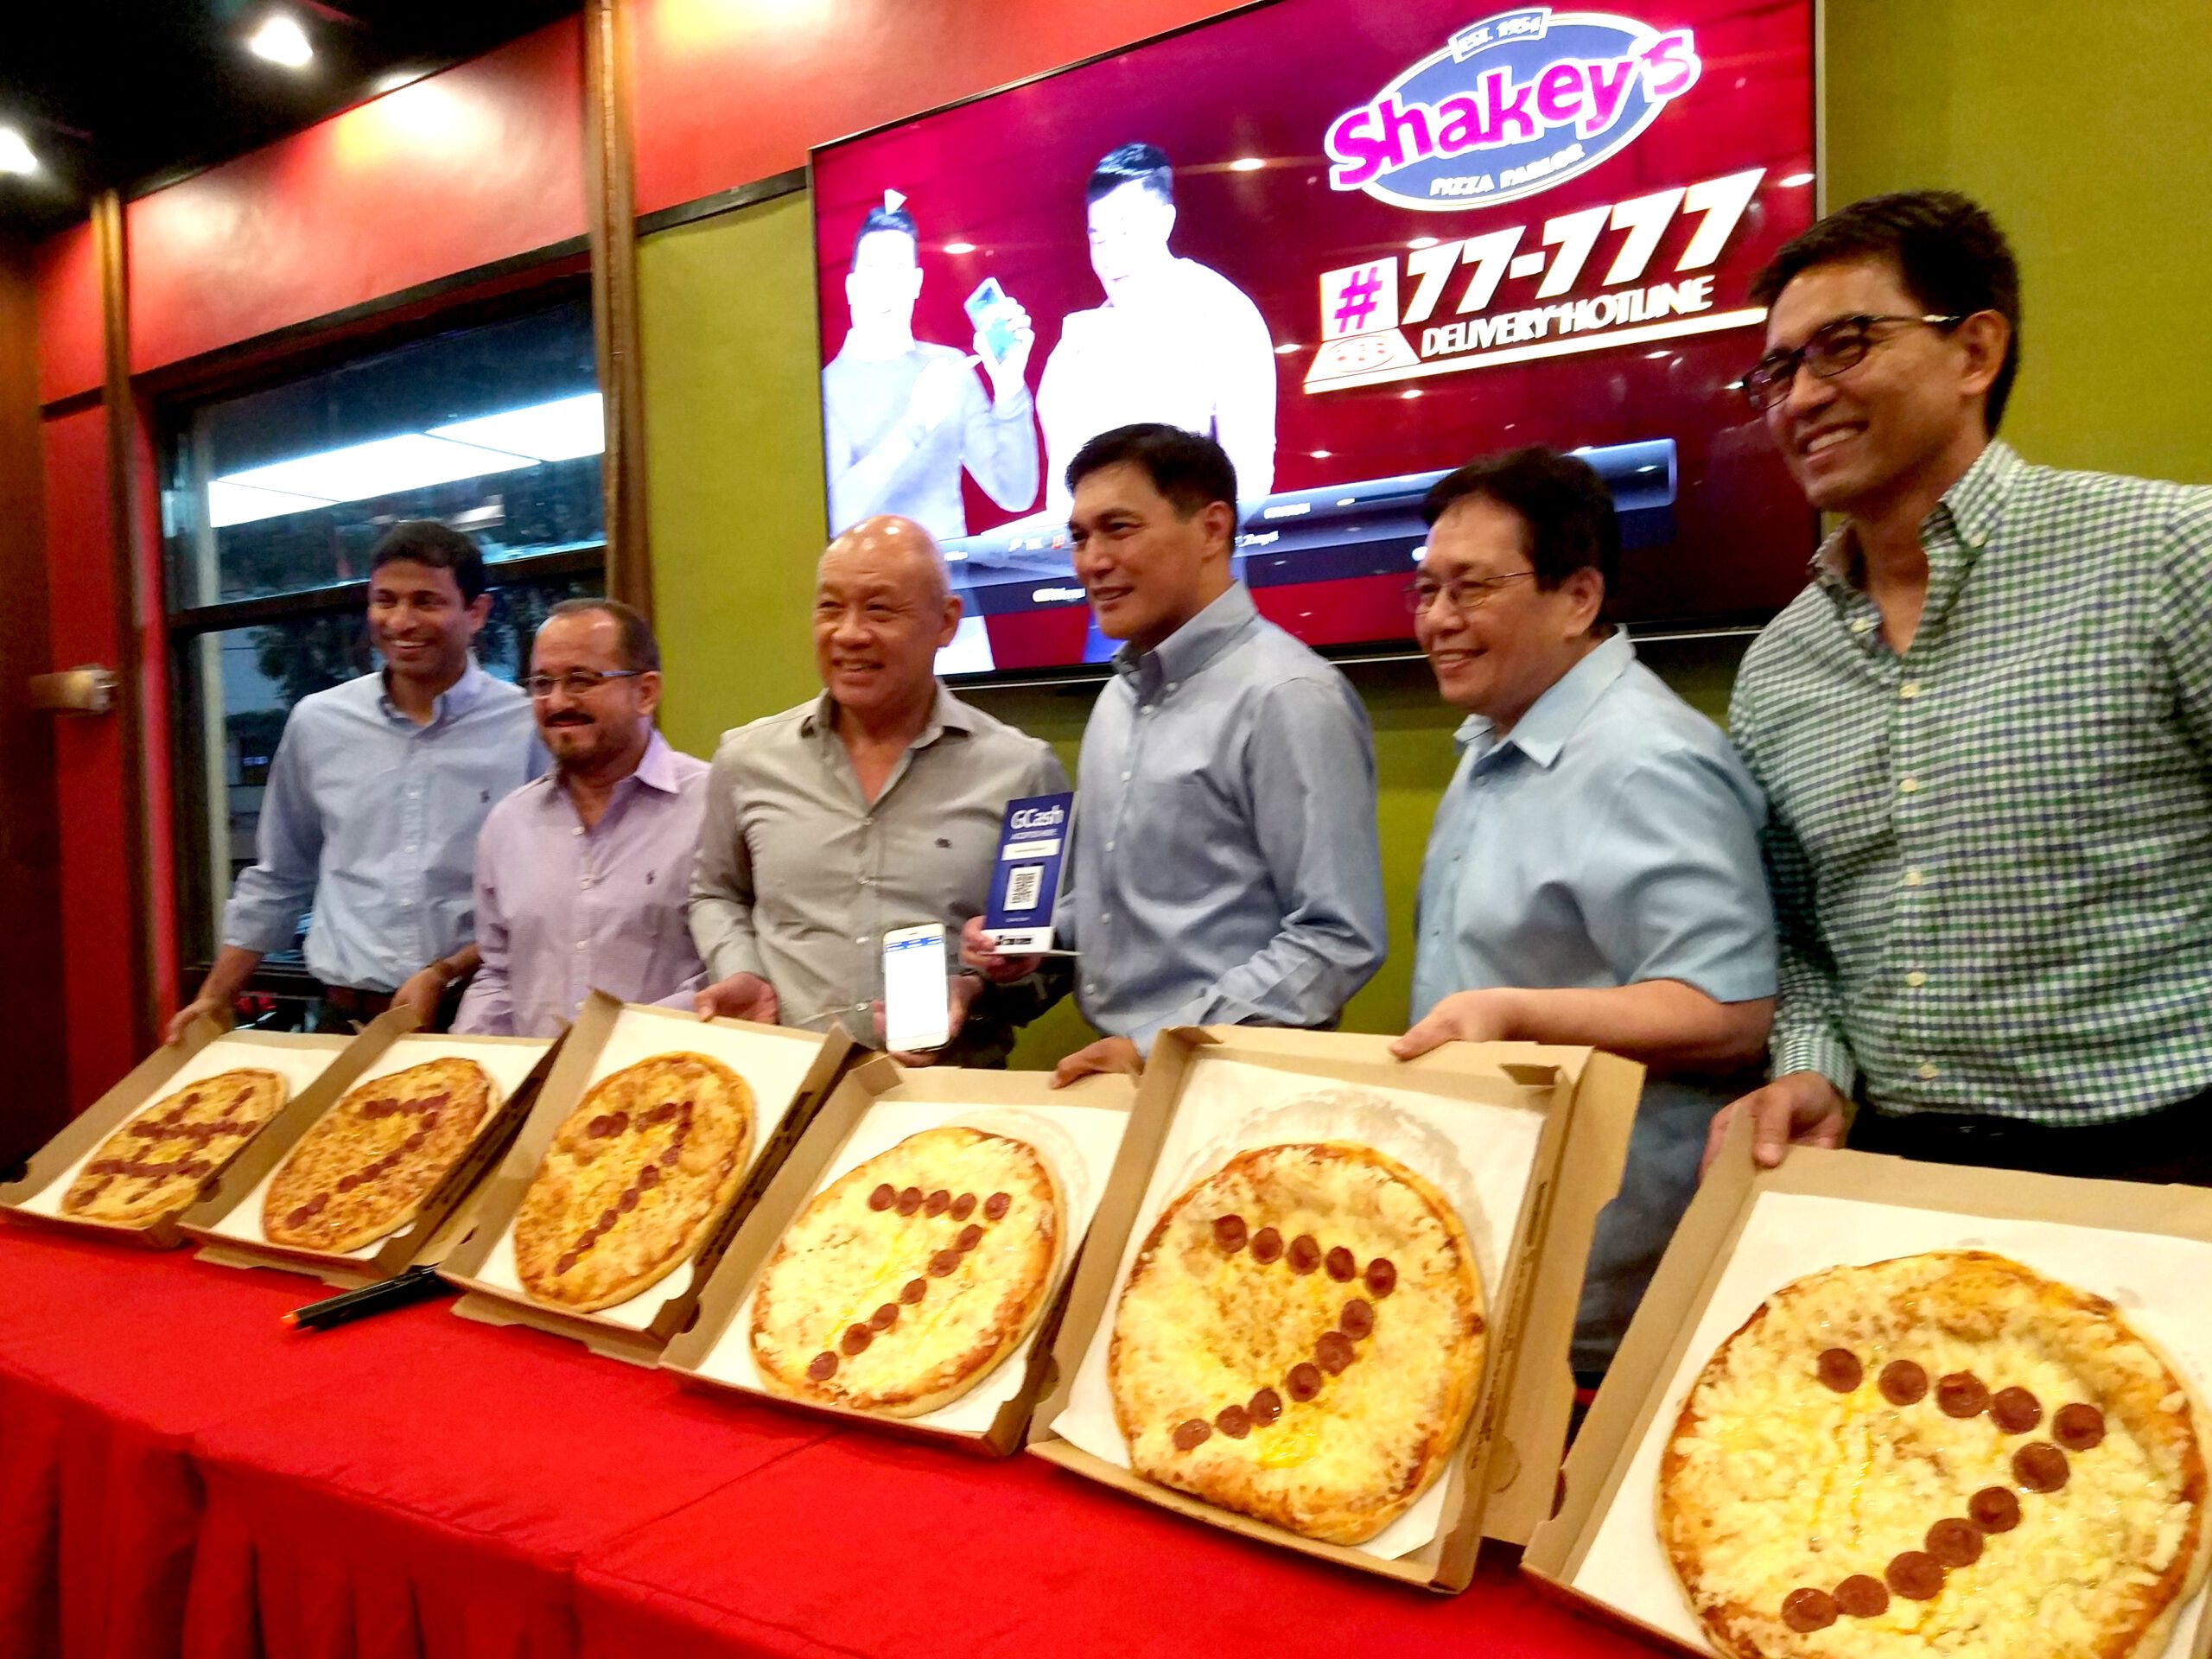 Globe, Shakey’s tie up for free calls for delivery, GCash payments